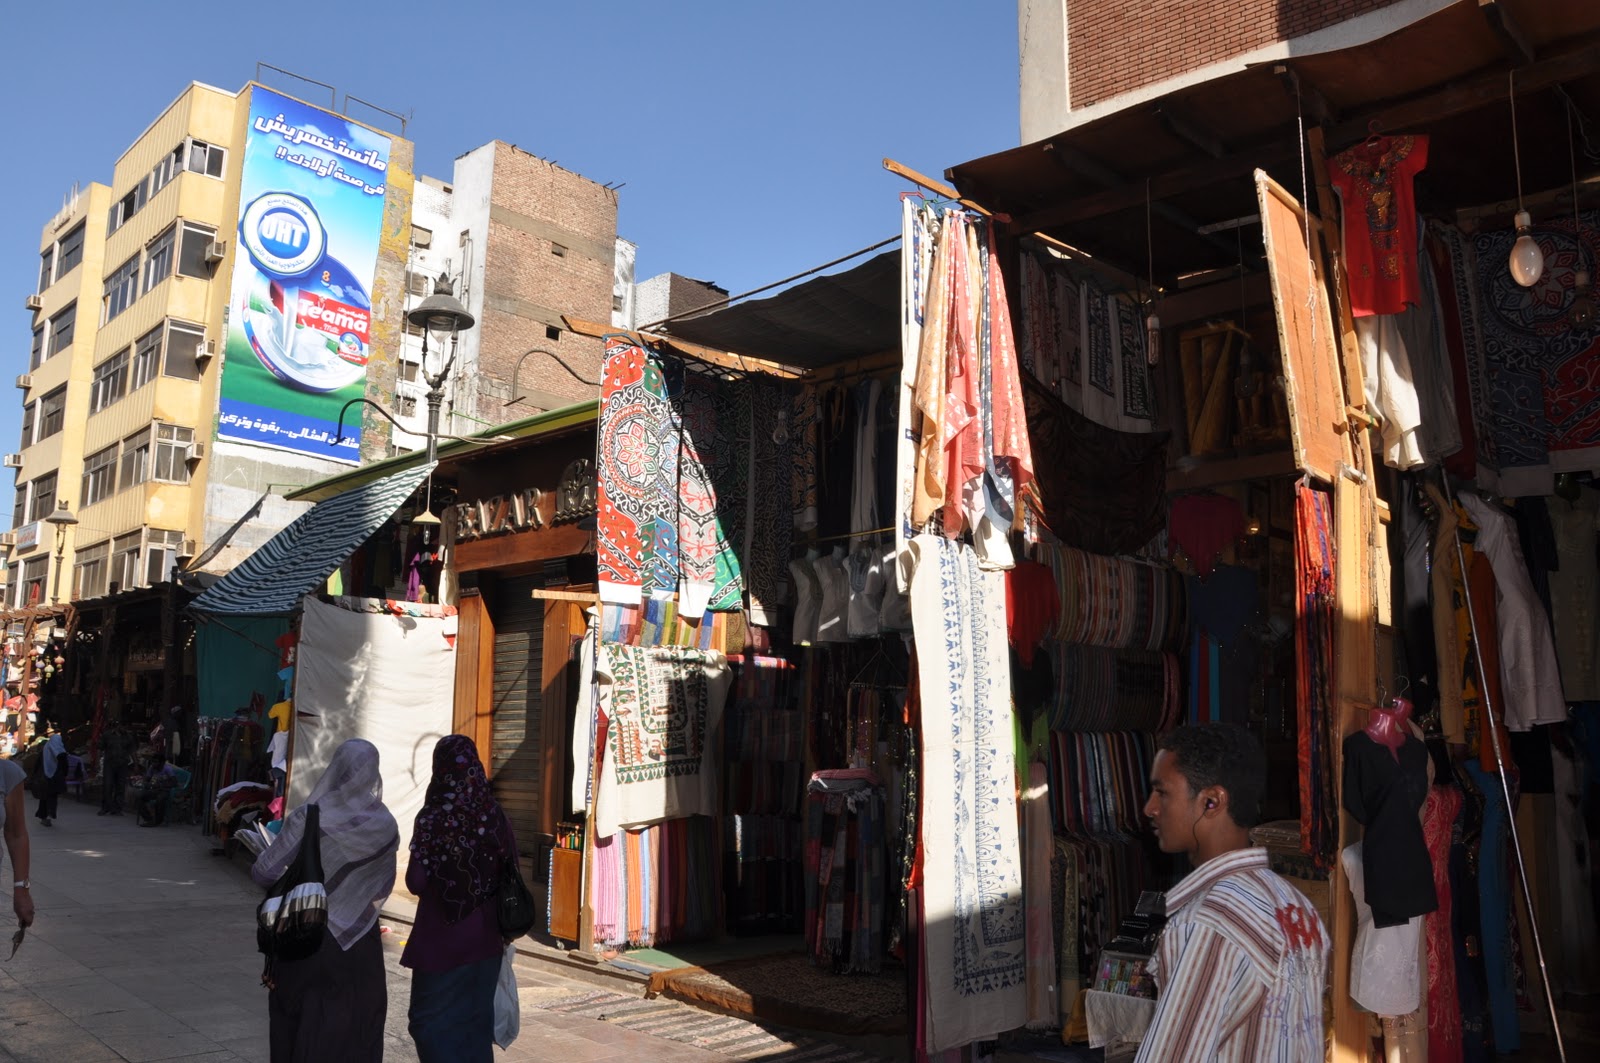 Jennifer's Trip to the Middle East: photos - Luxor market